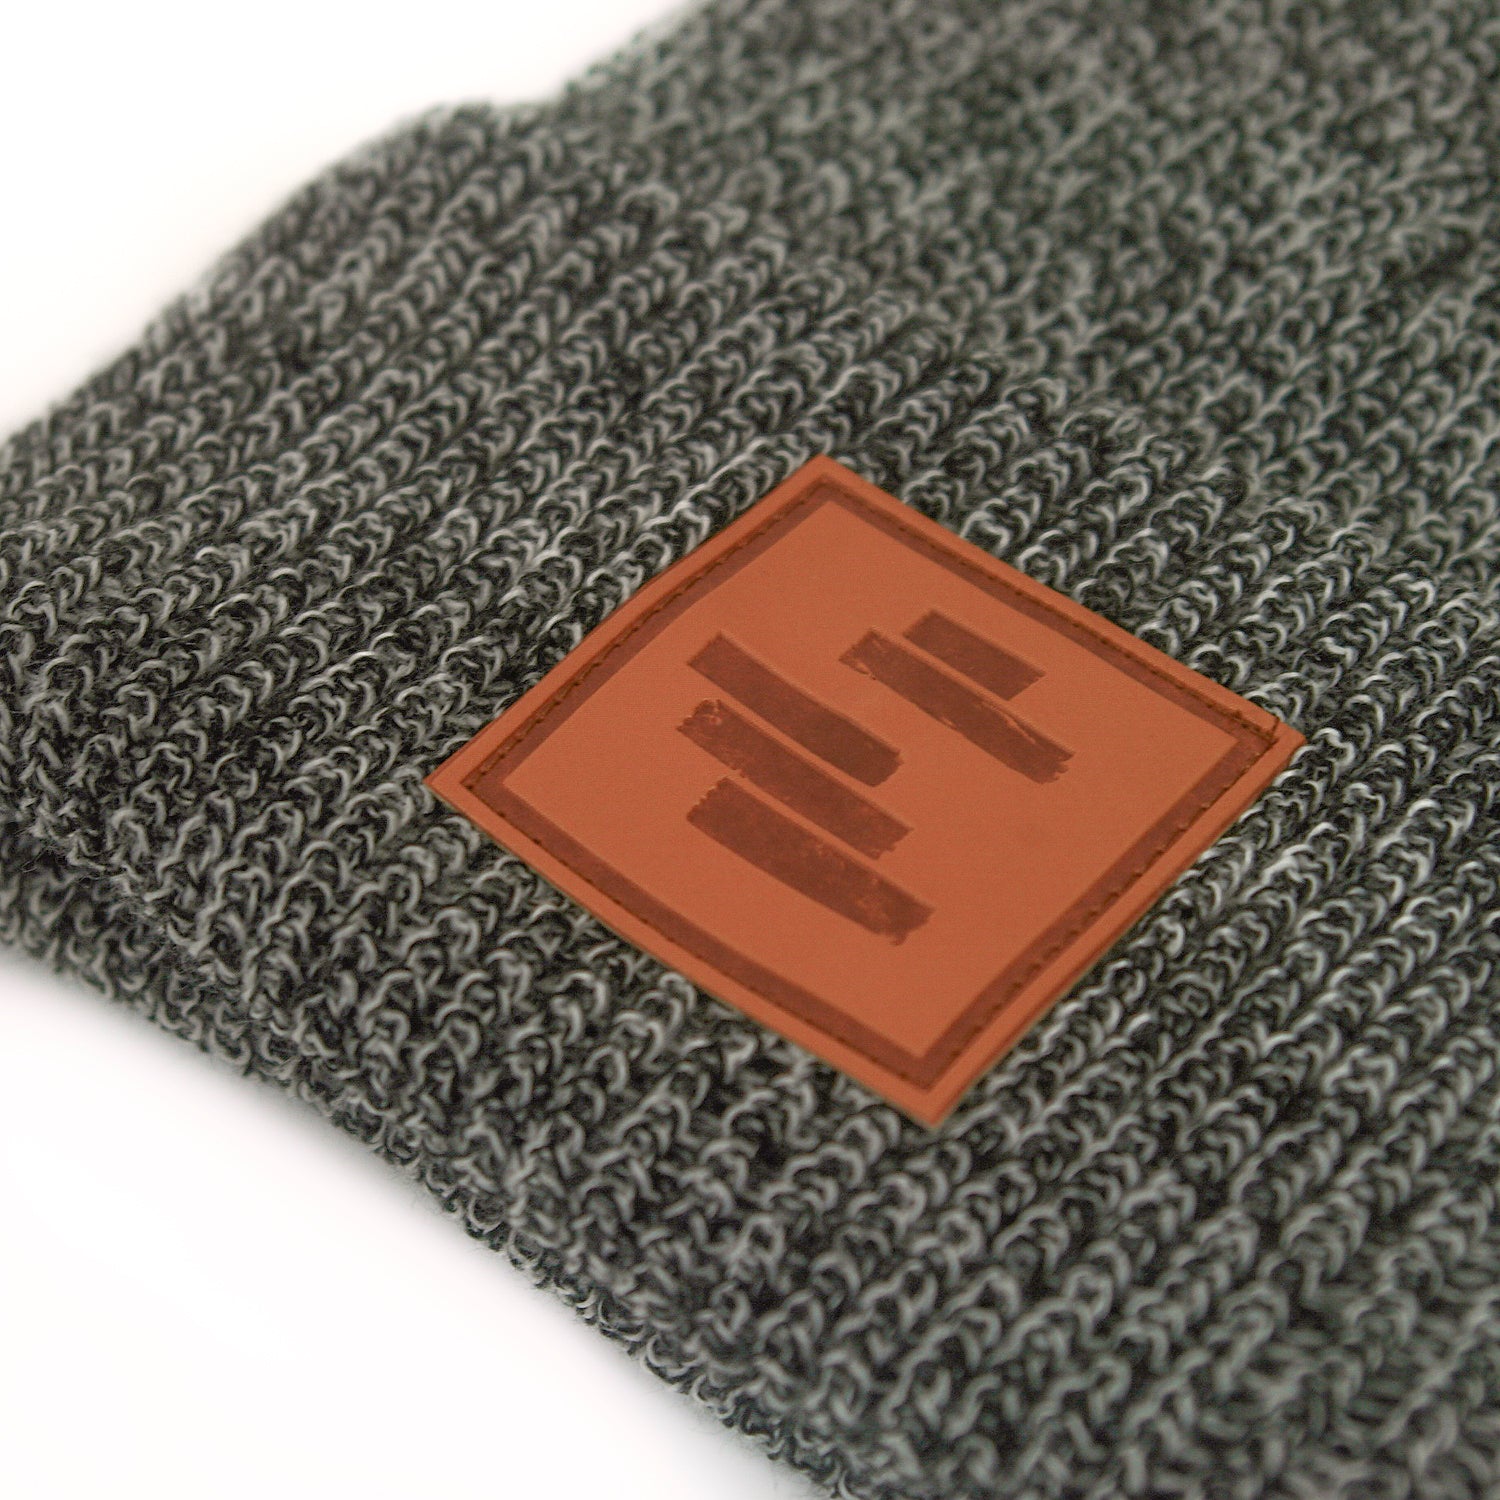 close up image of a black and white peppered woven winter beanie on a white background. front cuff has brown square stamped patch sewn on. five dark brown horizontal rectangles are stamped on the patch like the black lines art.